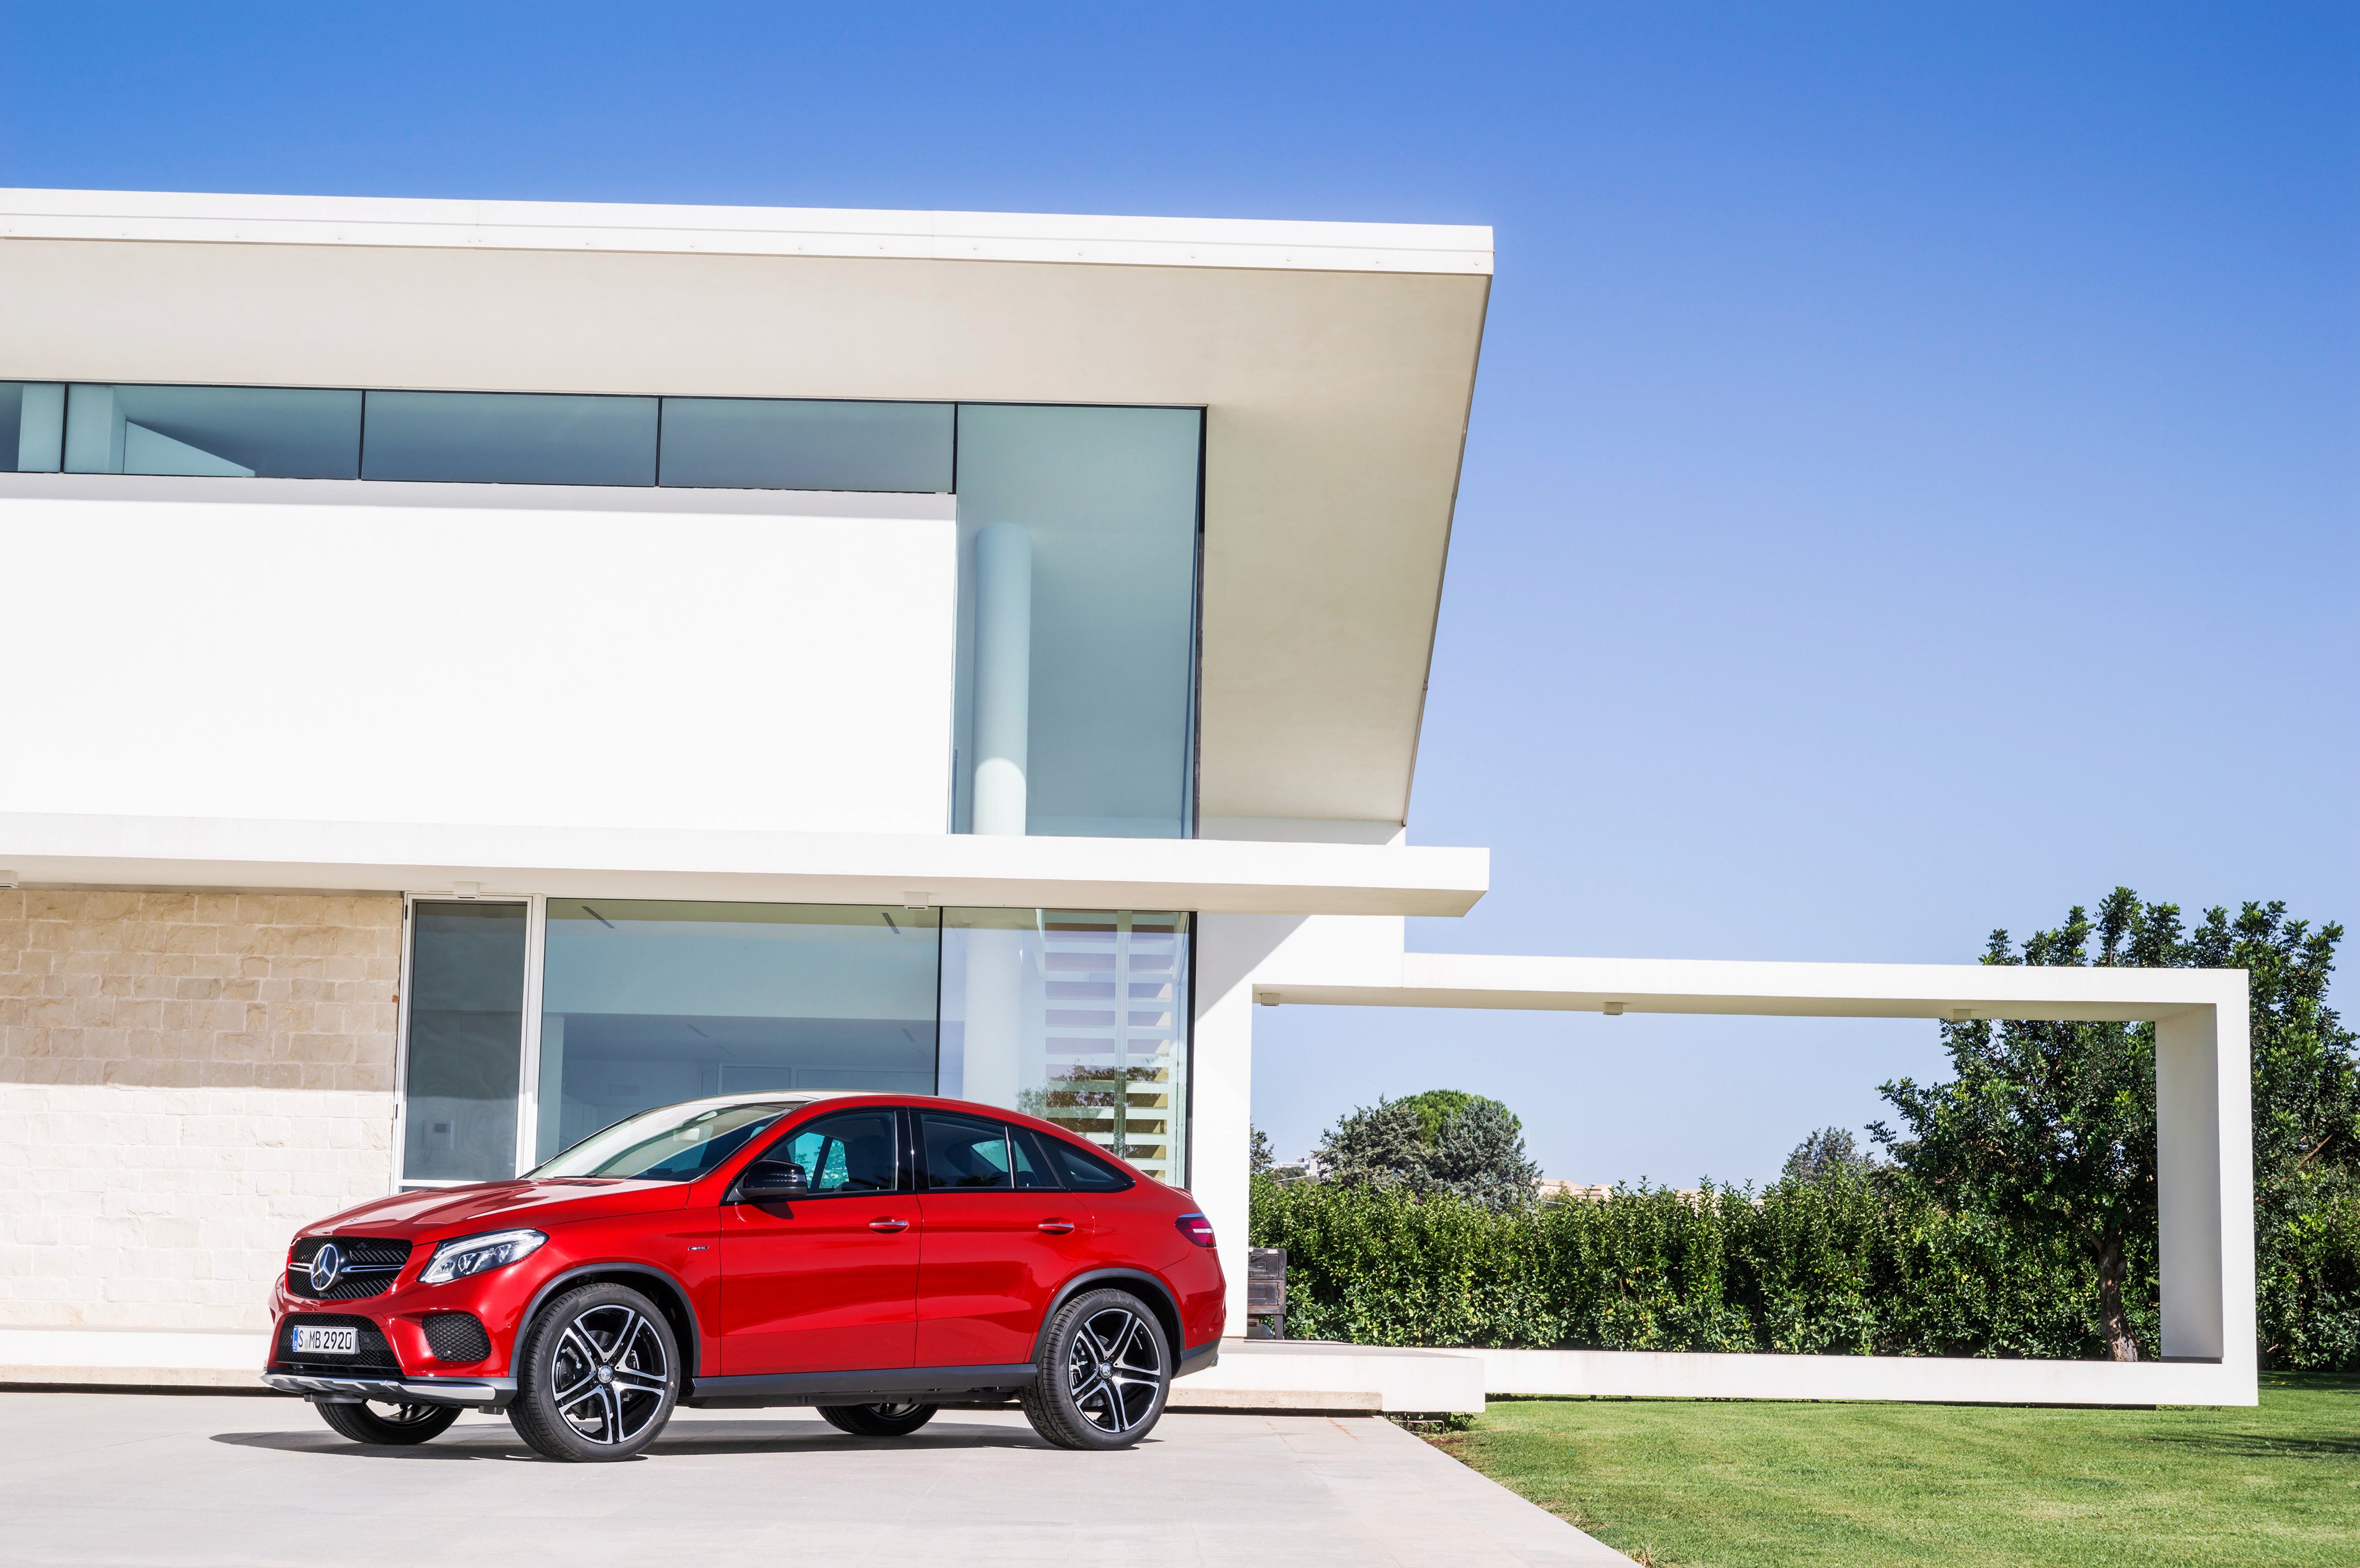 2015, Mercedes, Benz, Gle, 450, Amg, 4matic, Coupe,  c292 , Awd, Suv Wallpaper